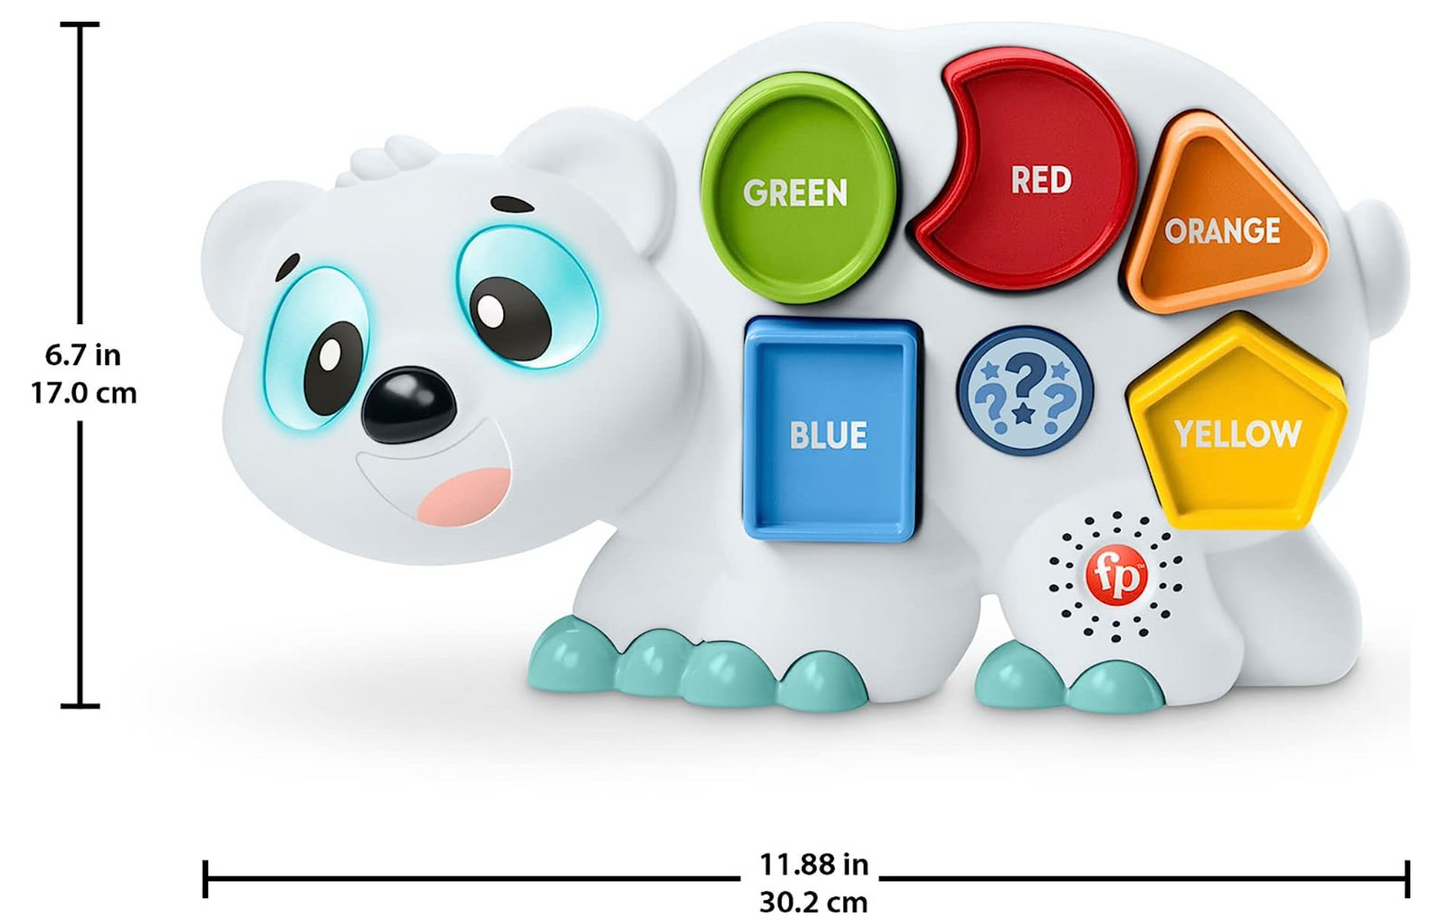 Fisher-Price Linkimals Toddler Learning Toy Puzzlin’ Shapes Polar Bear with Interactive Lights & Music for Ages 18+ Months